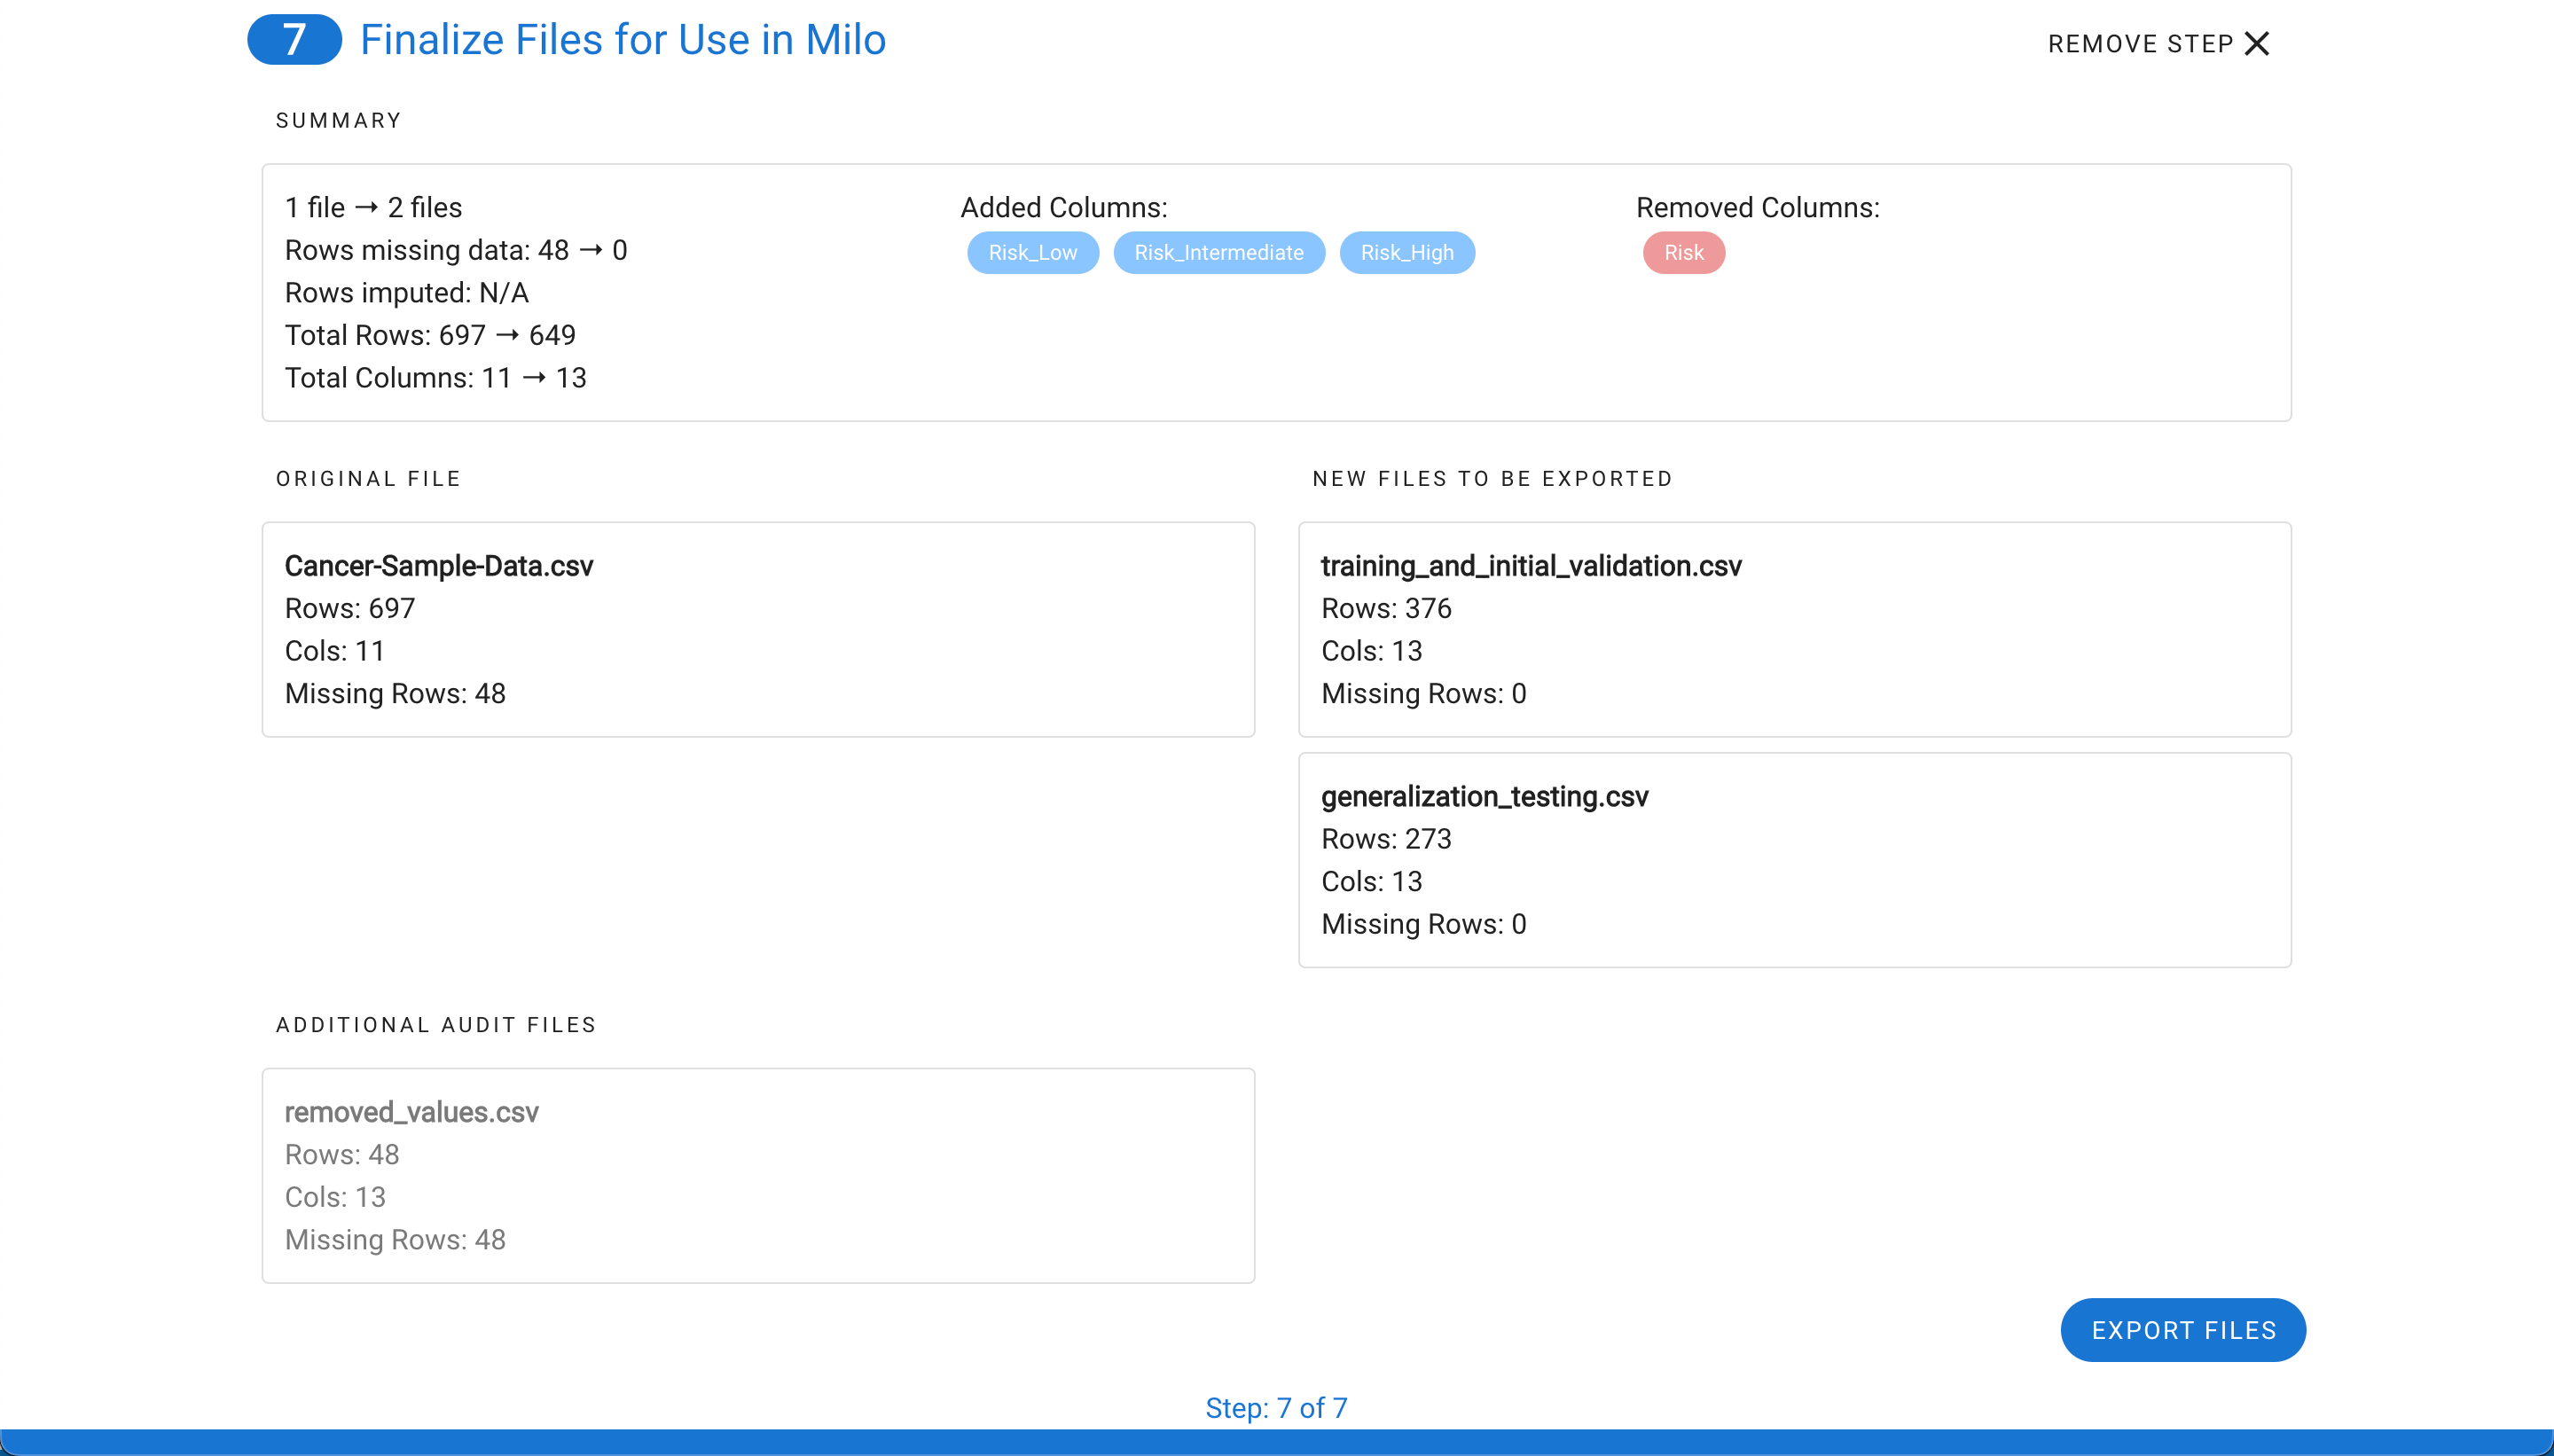 Finalizing Files for Use in MILO